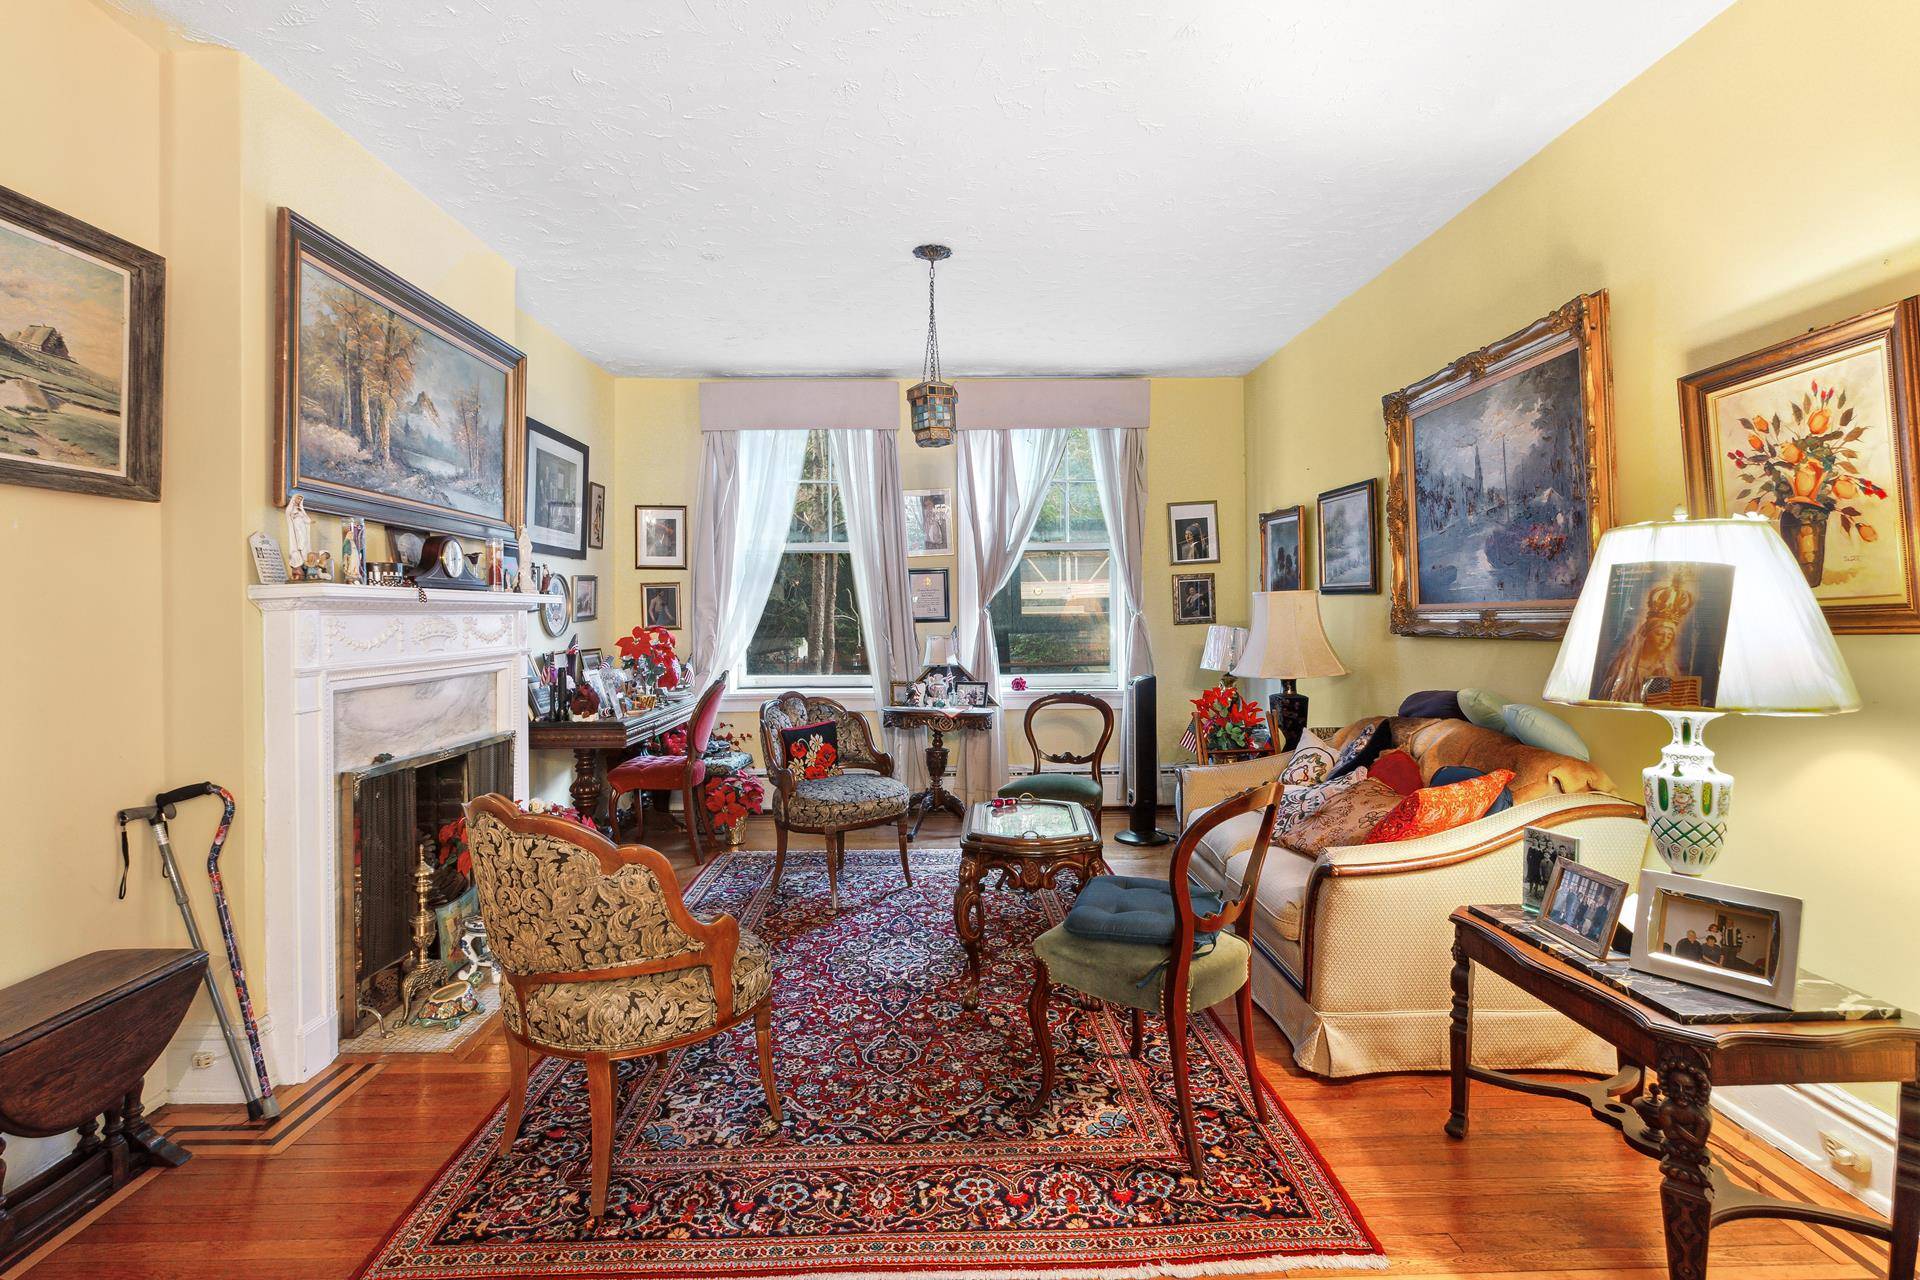 Rare Convertible 3 bedrooms 2 bathrooms prewar residence in sought after Hawthorne Court, one of Jackson Height's most coveted landmark buildings.